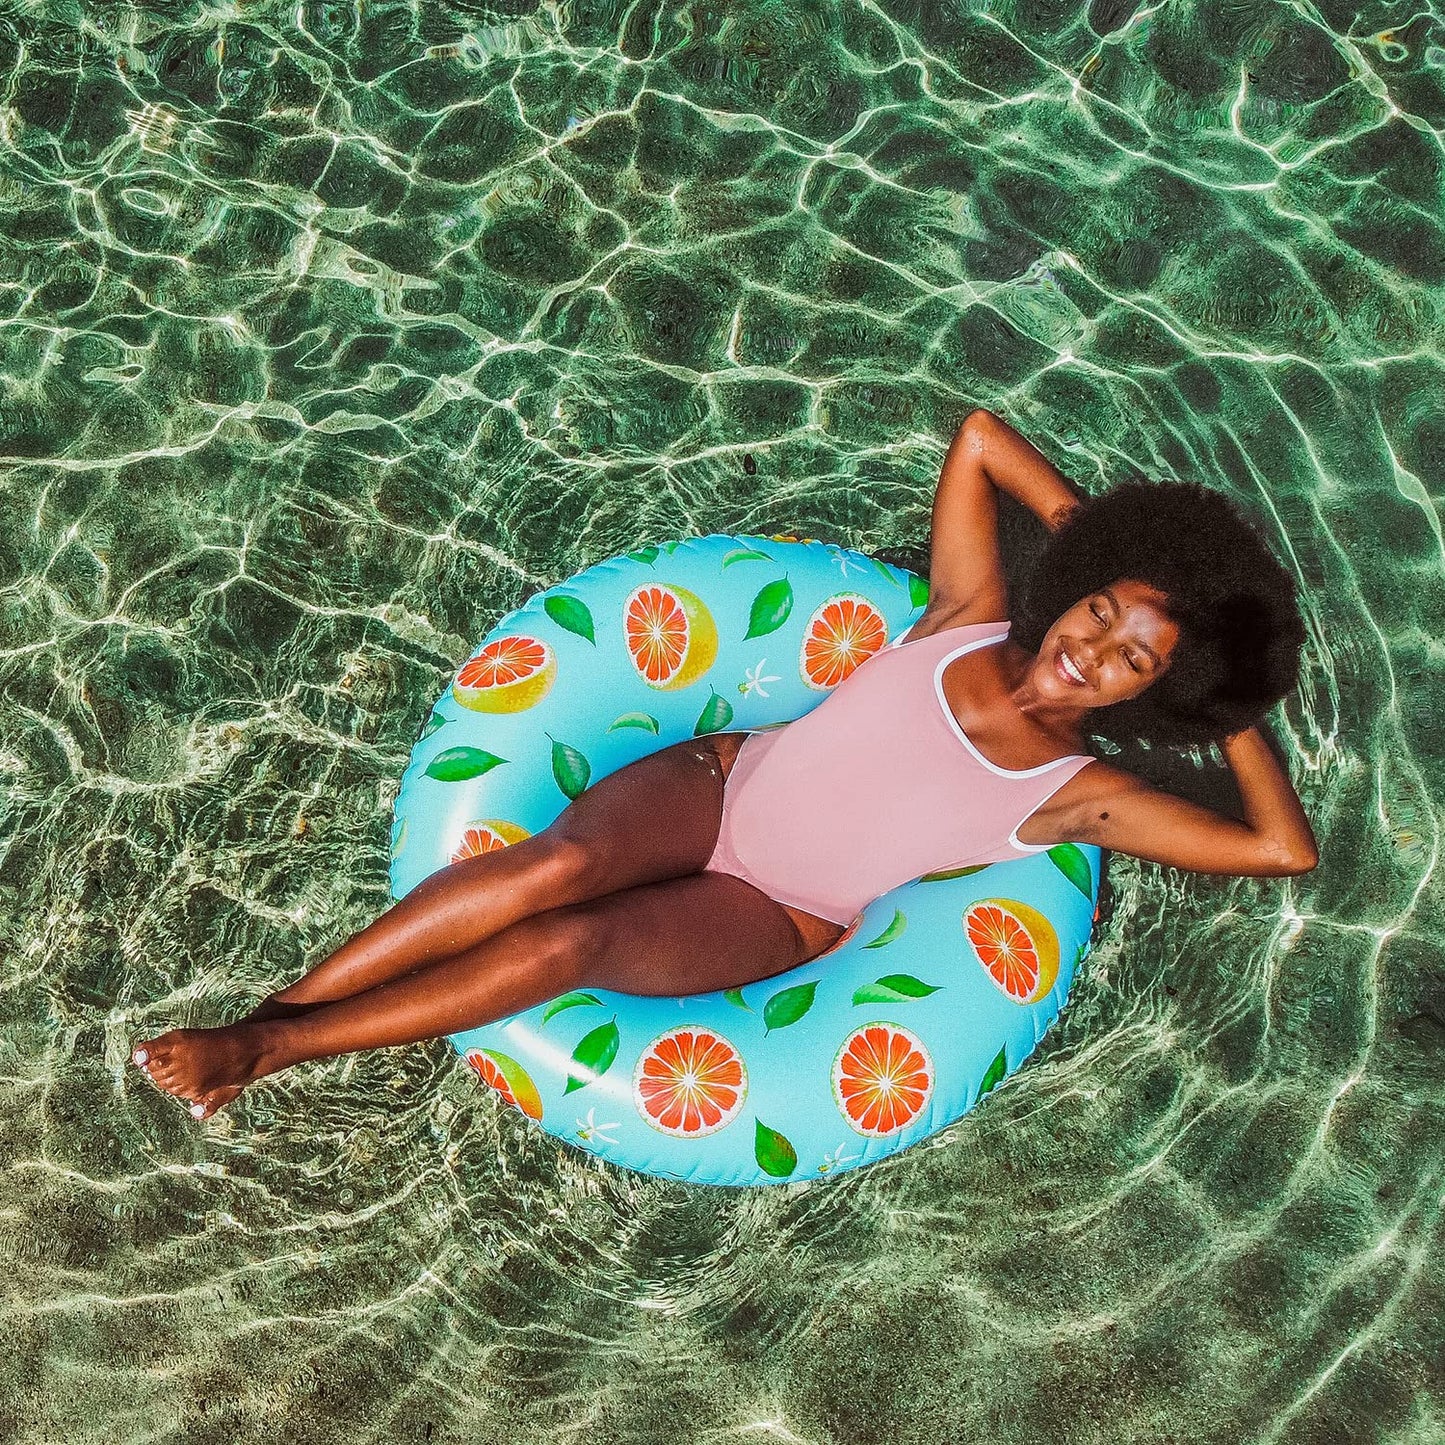 PoolCandy Grapefruit Print Inflatable Pool Floats, Loungers, Sun Chairs & Sunning Pools (Grapefruit 42" Pool Tube)